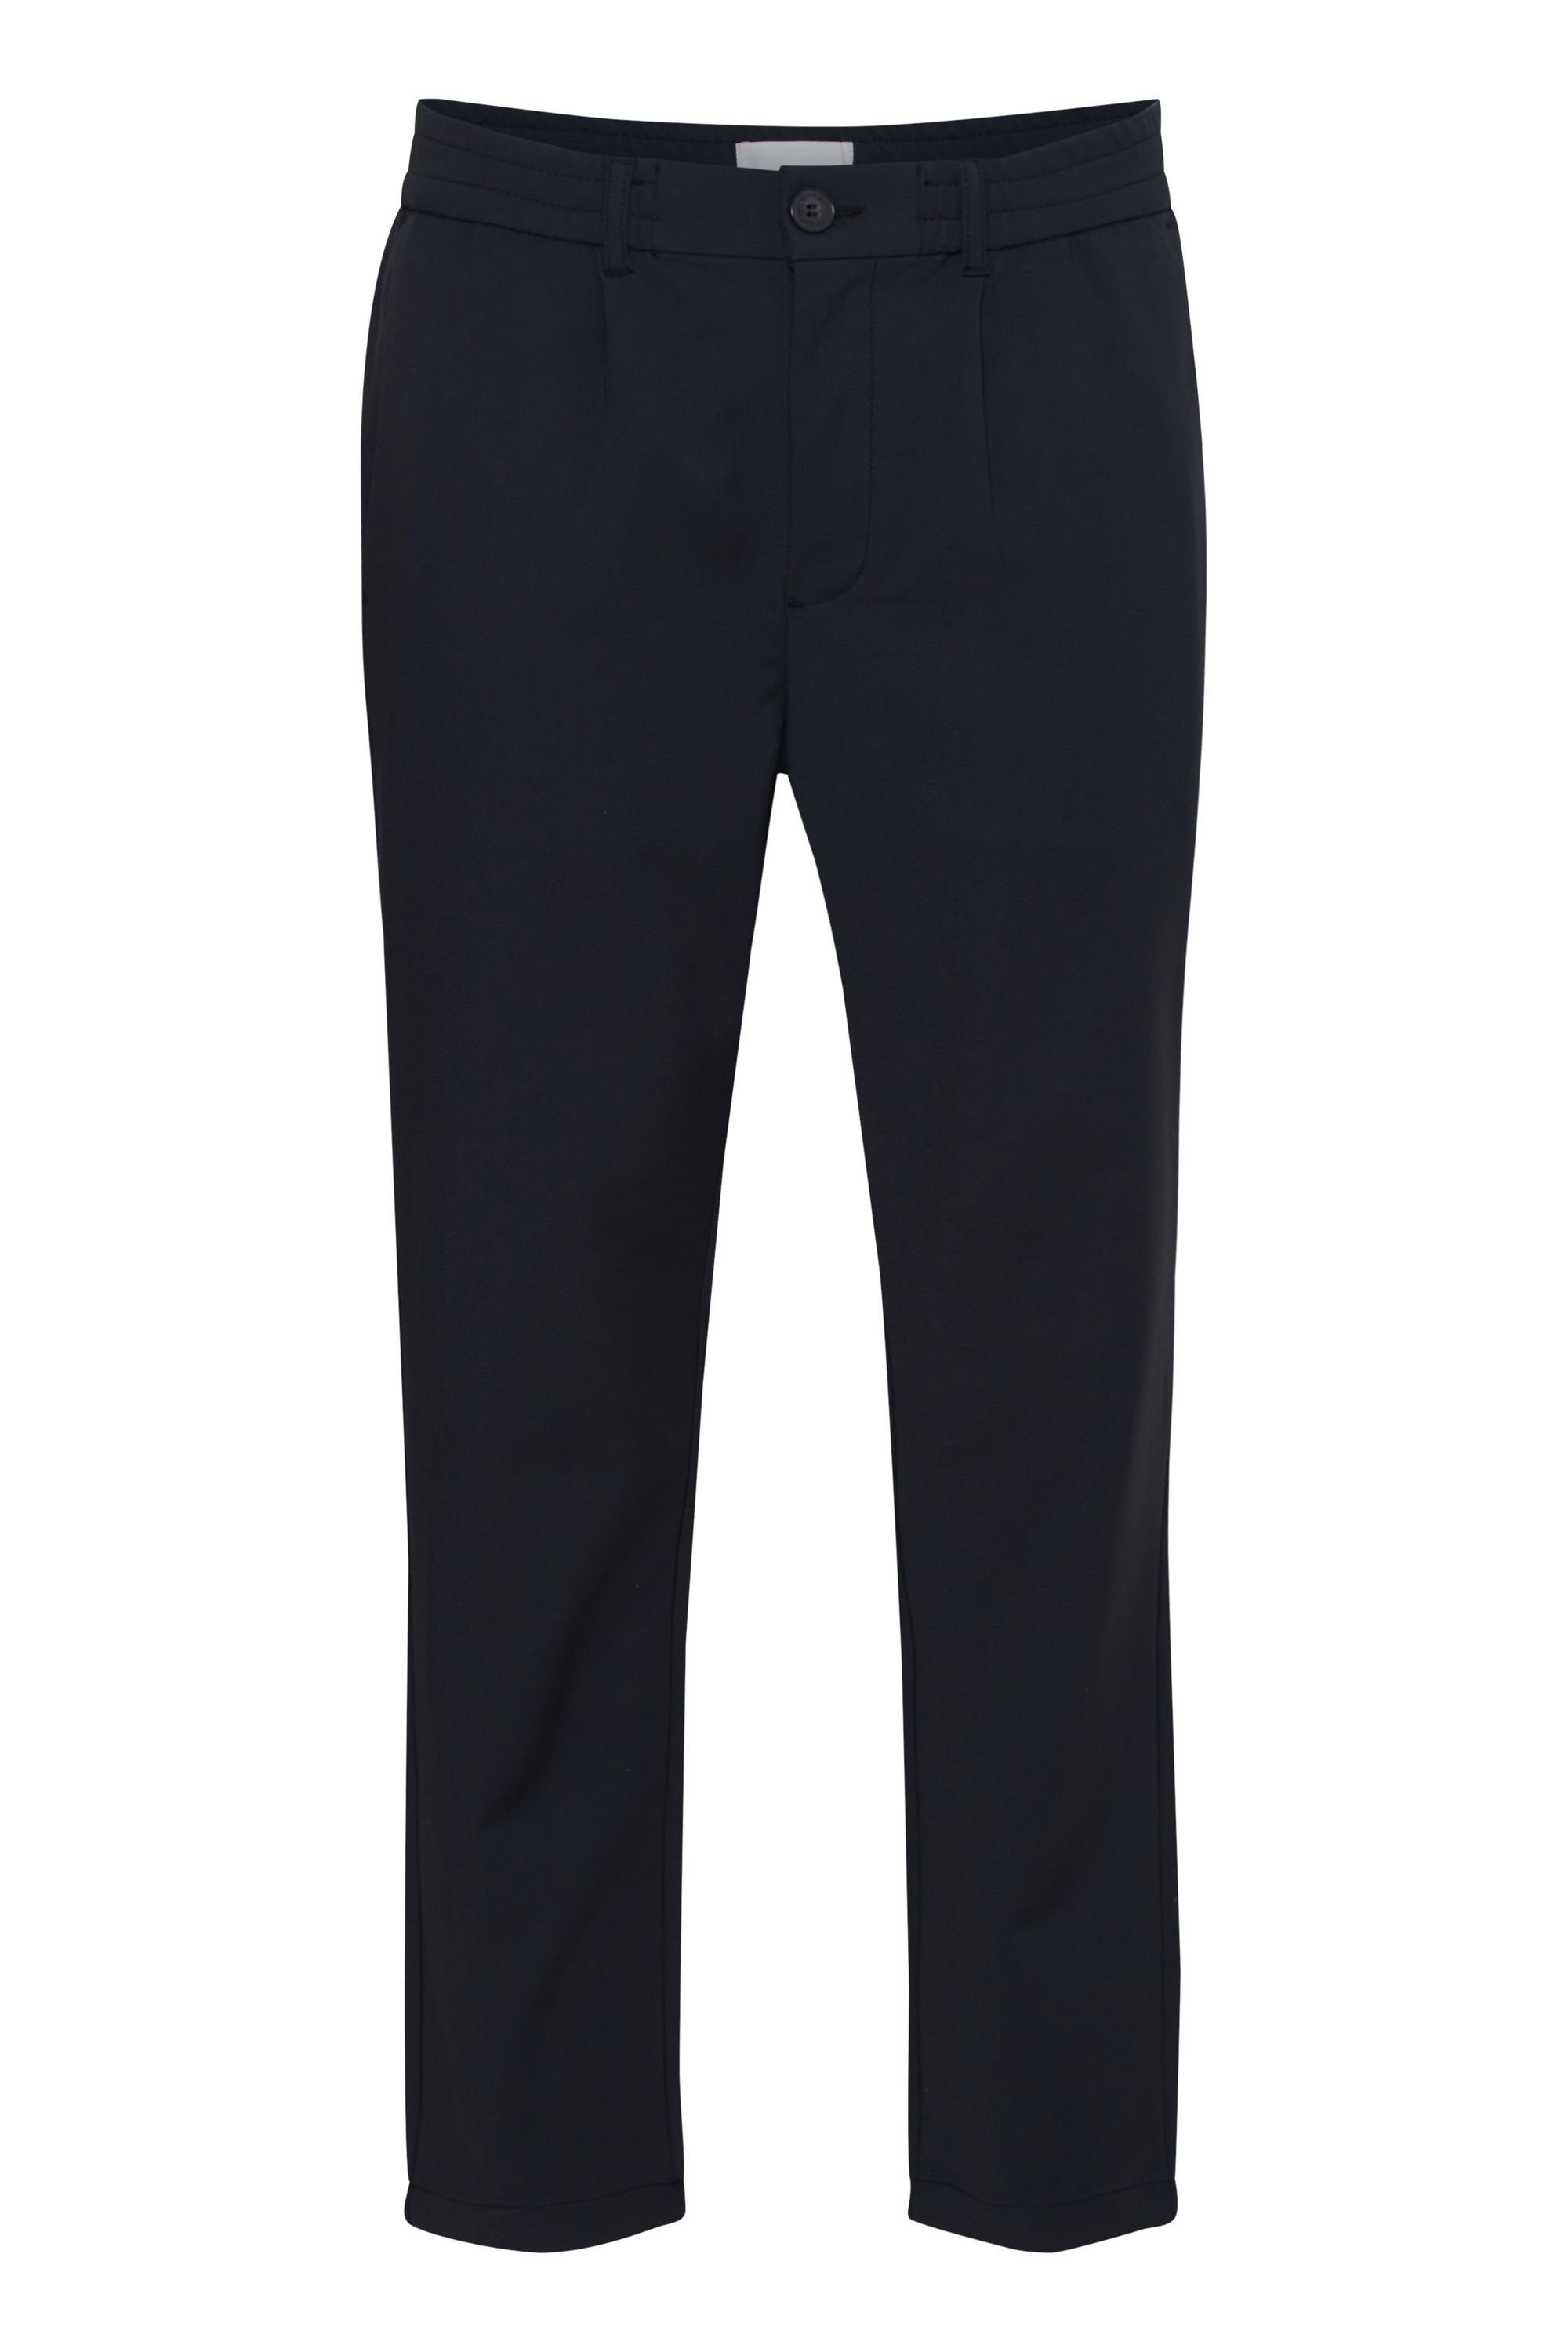 20504943 Dark pleat CFMarc Friday pnts Casual Navy with Stoffhose - performance (194013)